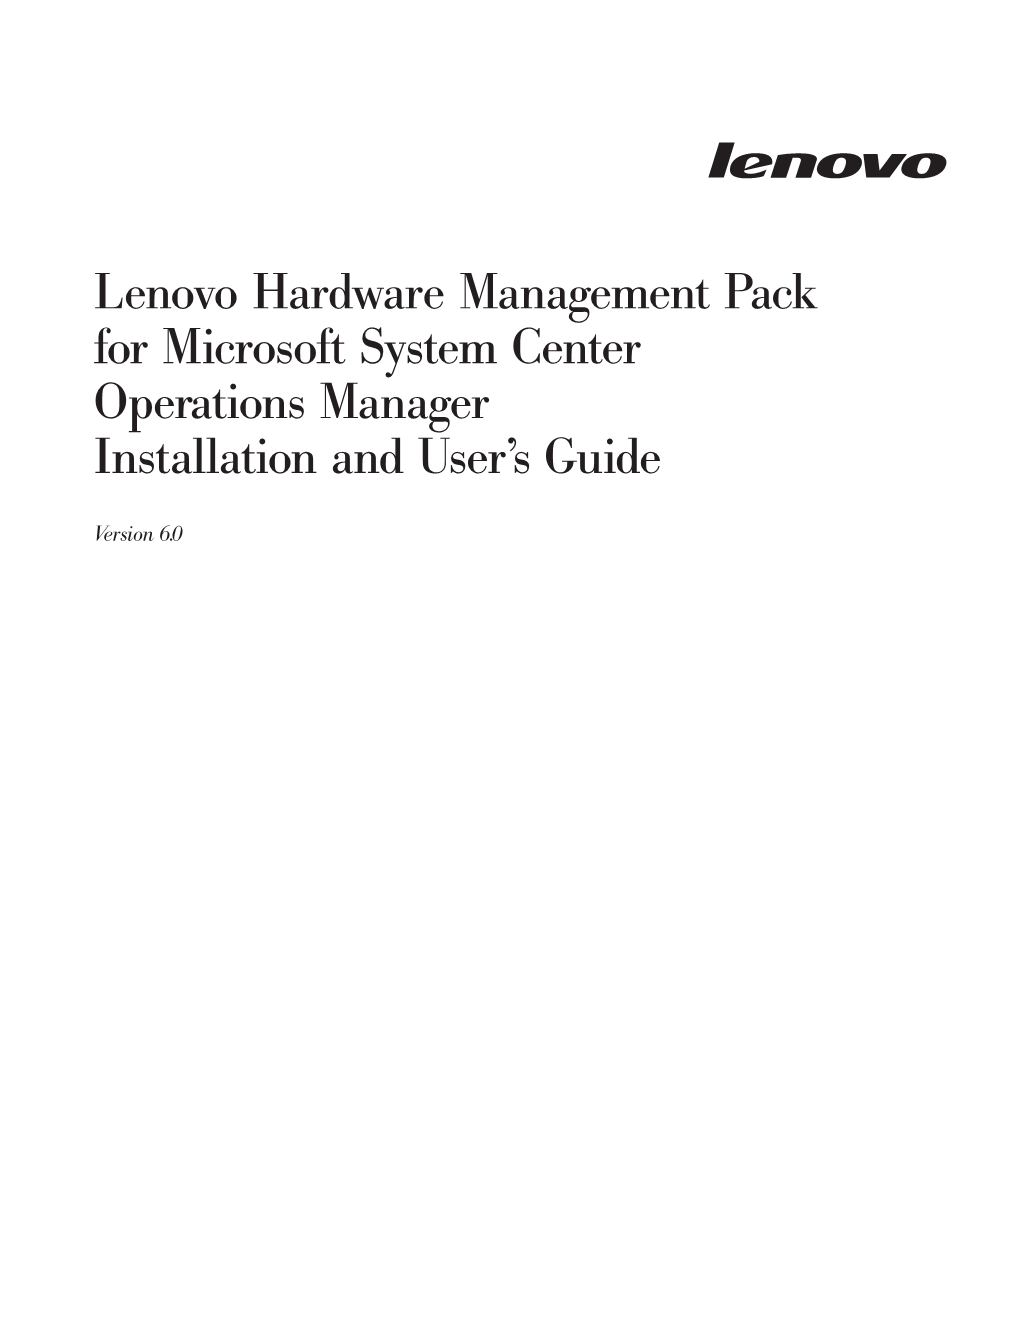 Lenovo Hardware Management Pack for Microsoft System Center Operations Manager Installation and User’S Guide